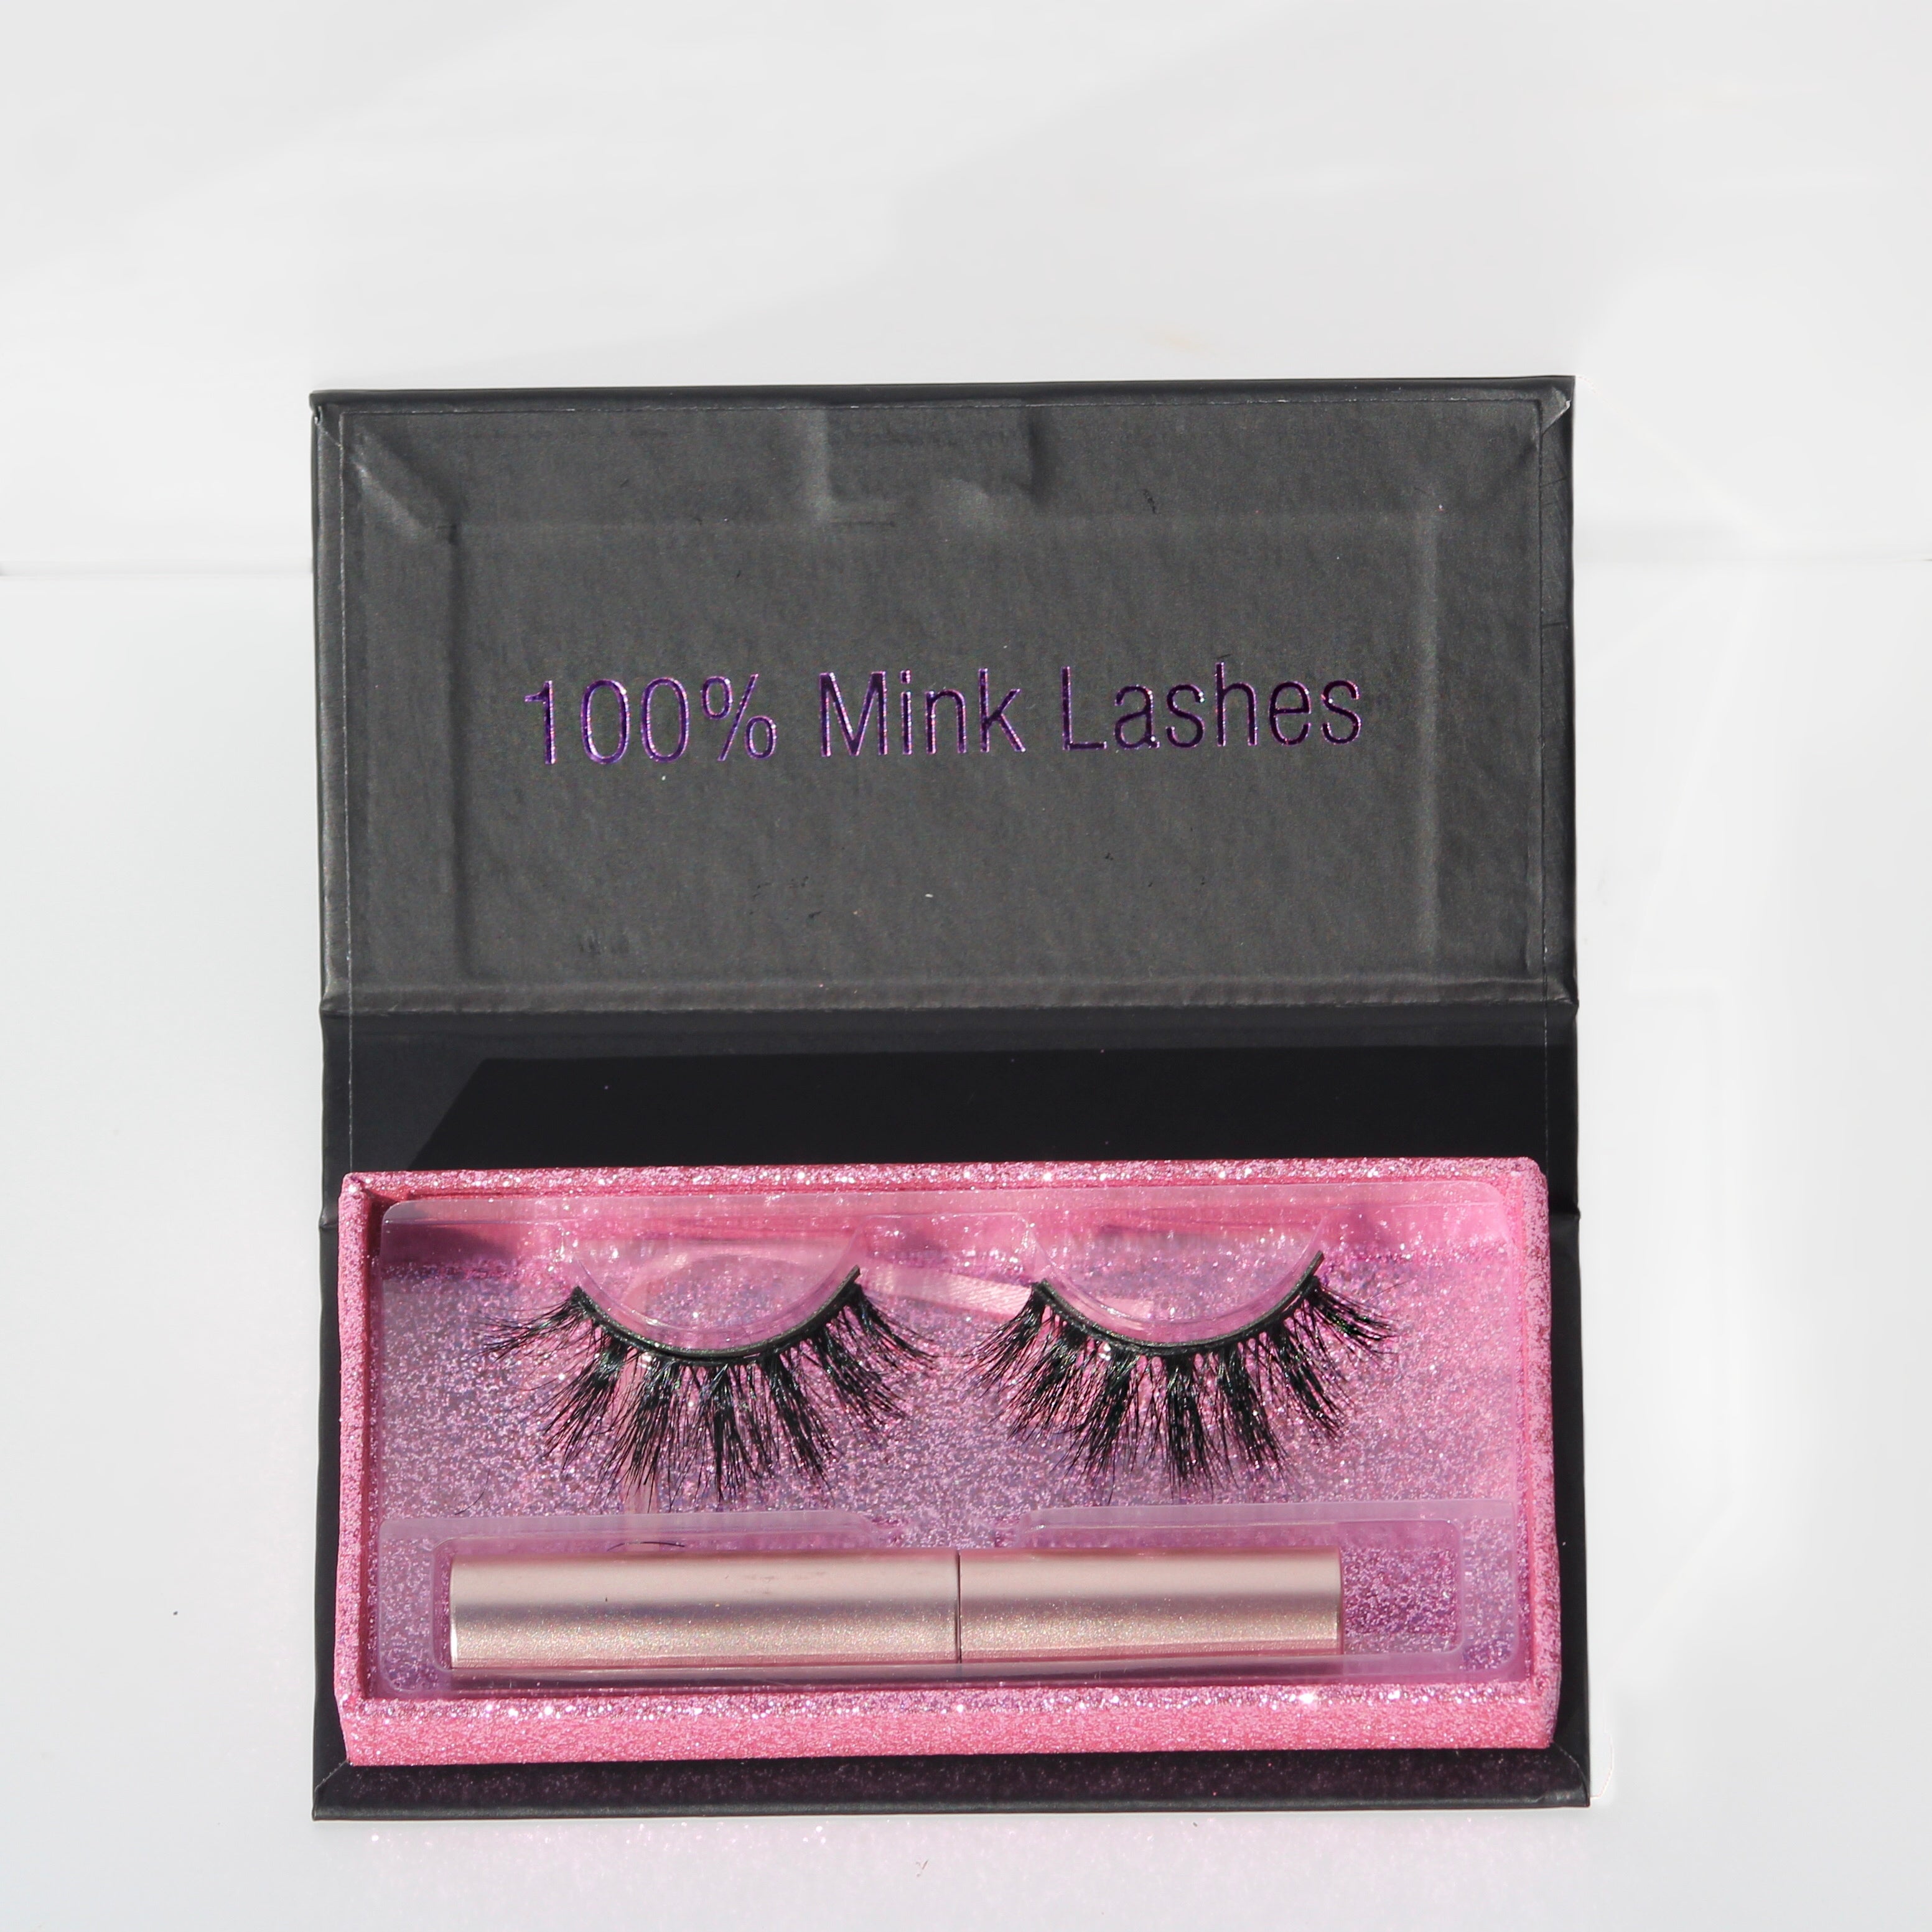 100% Mink Lashes - Dolled Up